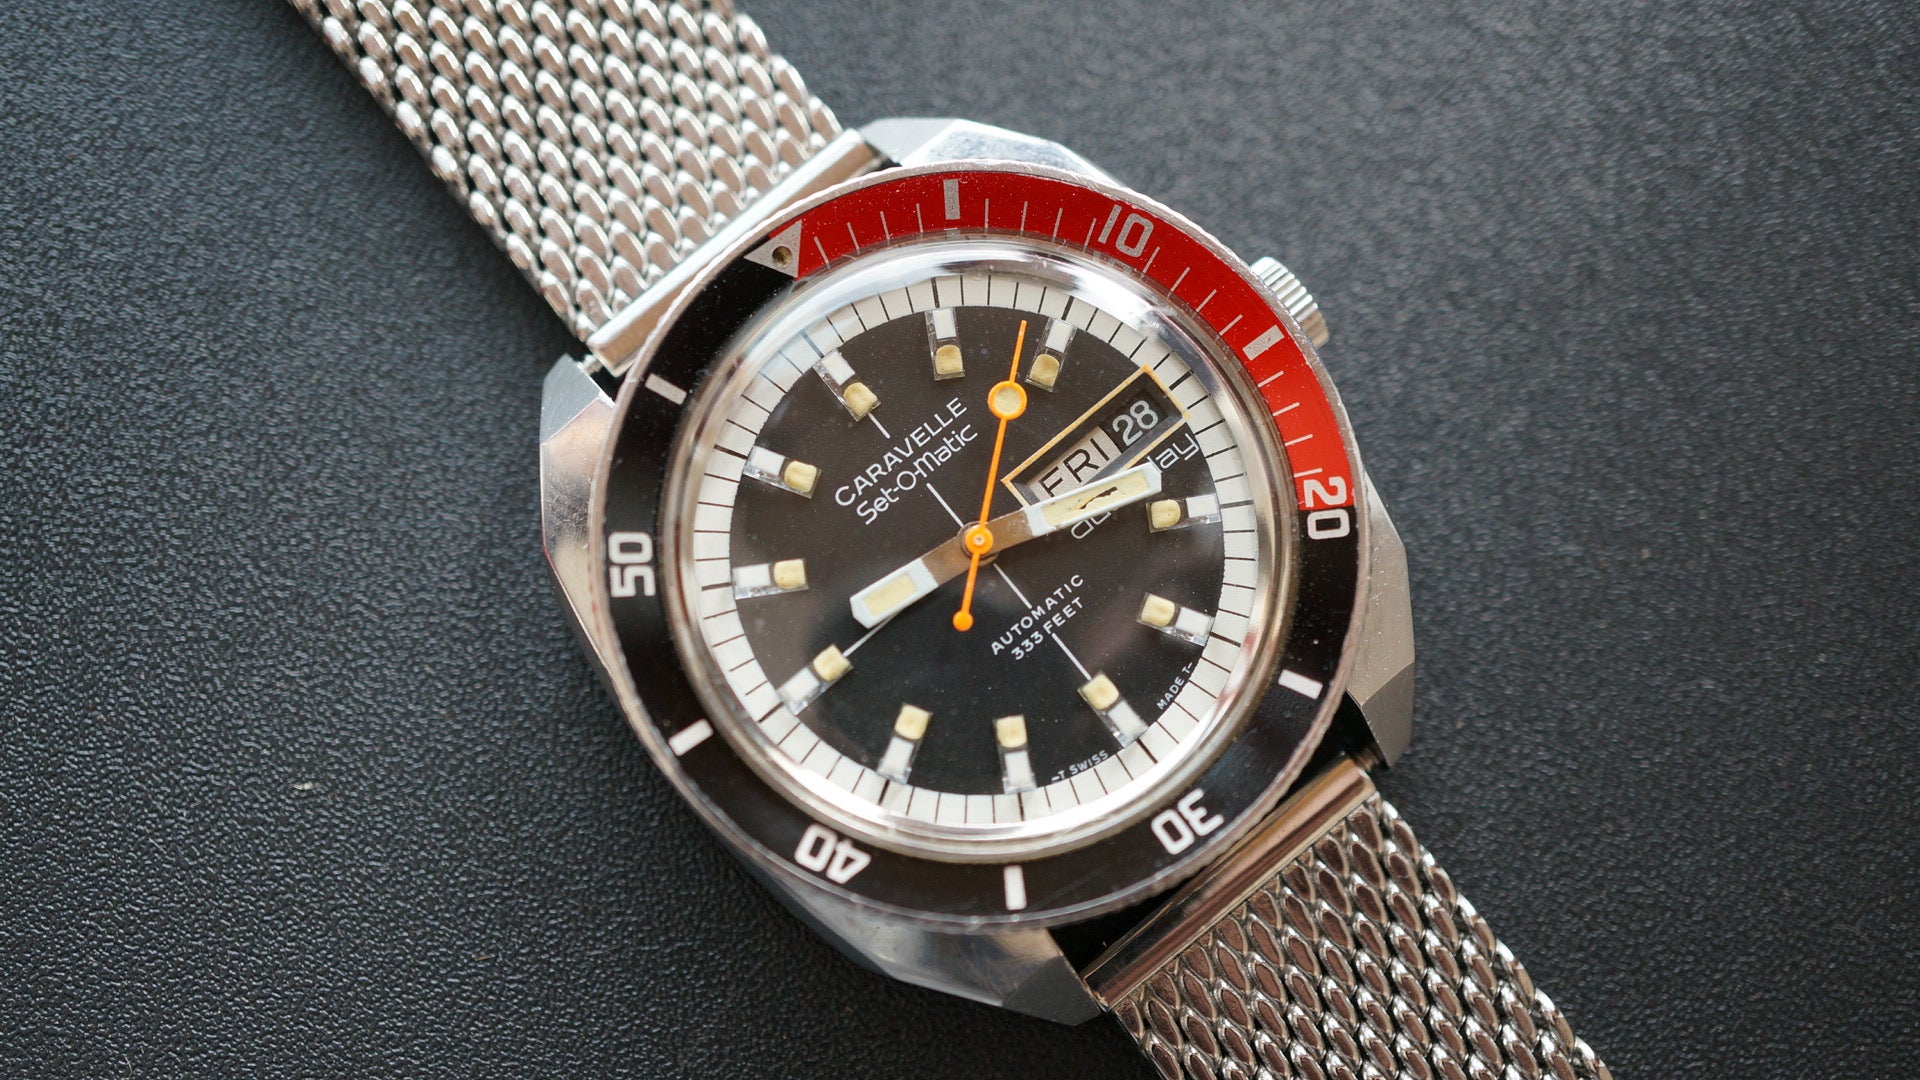 FS: Caravelle set-o-matic dual-day 333 feet diver | Page 2 | WatchUSeek ...